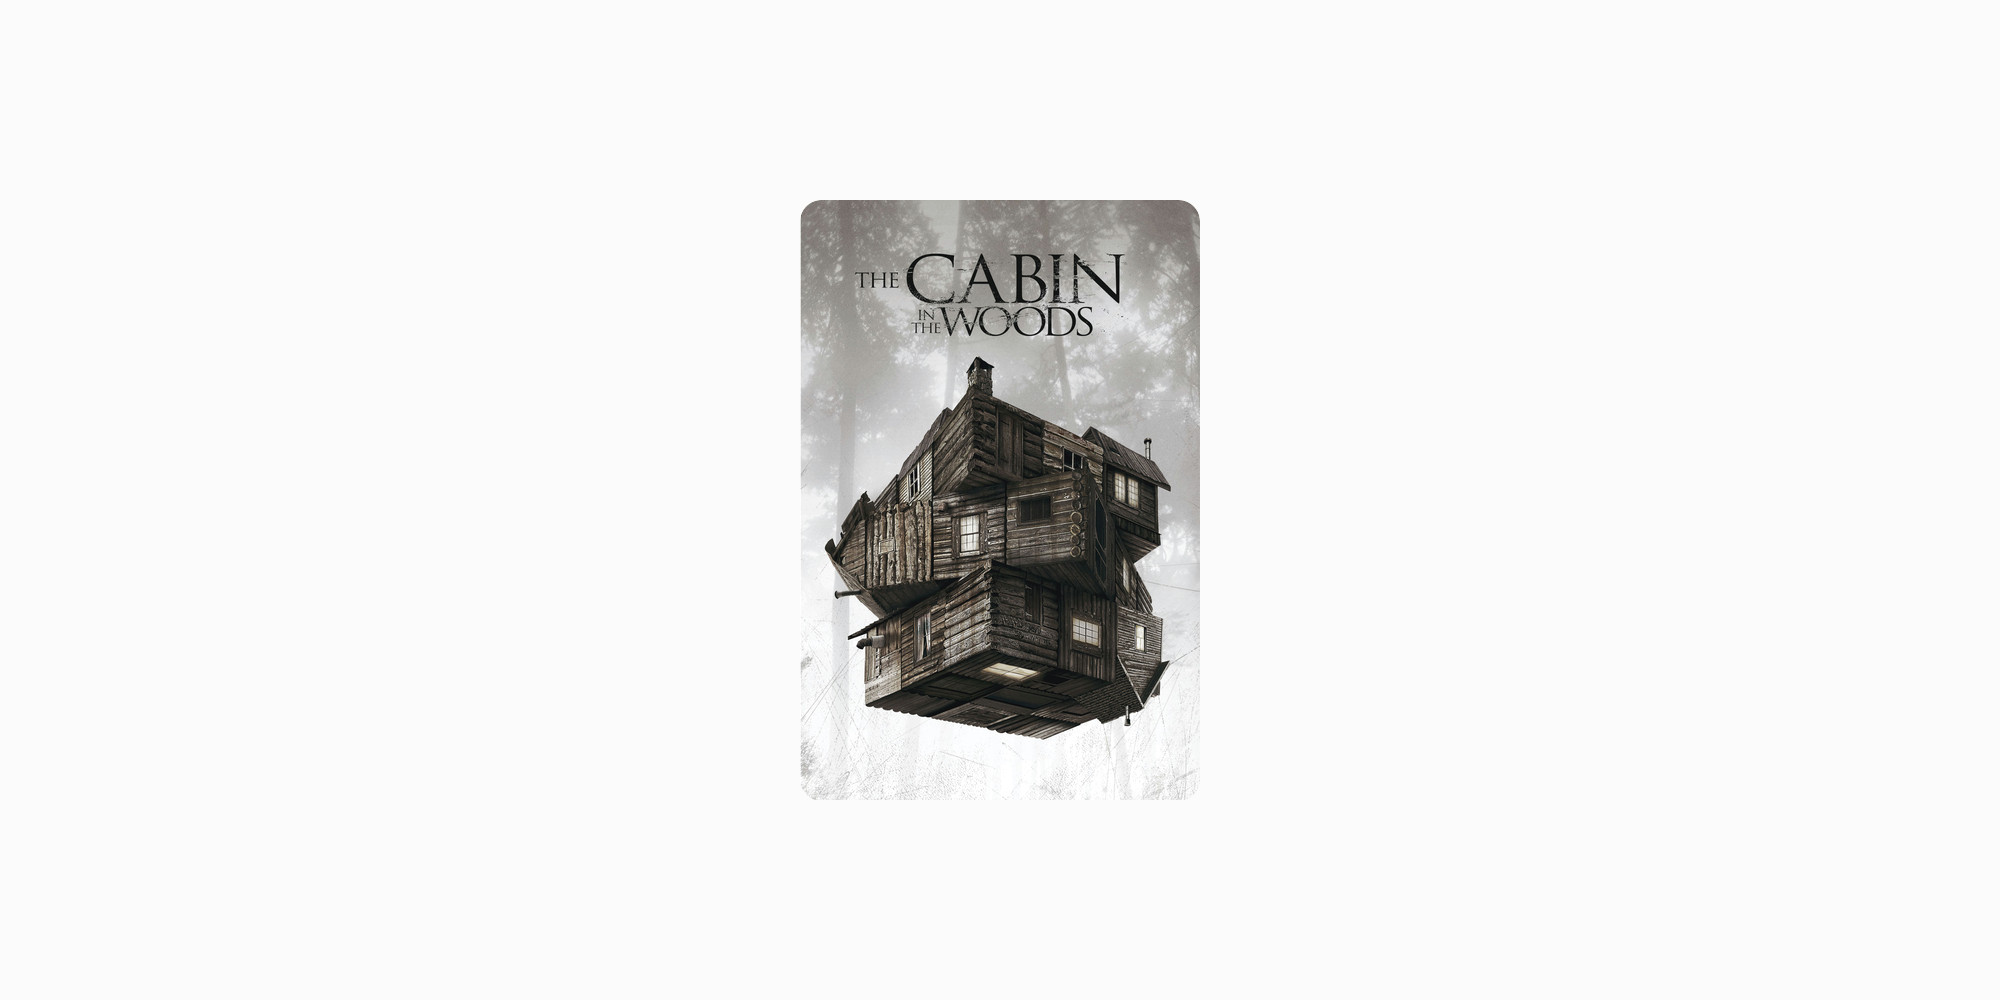 Drawing 5.1 the Cabin In the Woods In iTunes